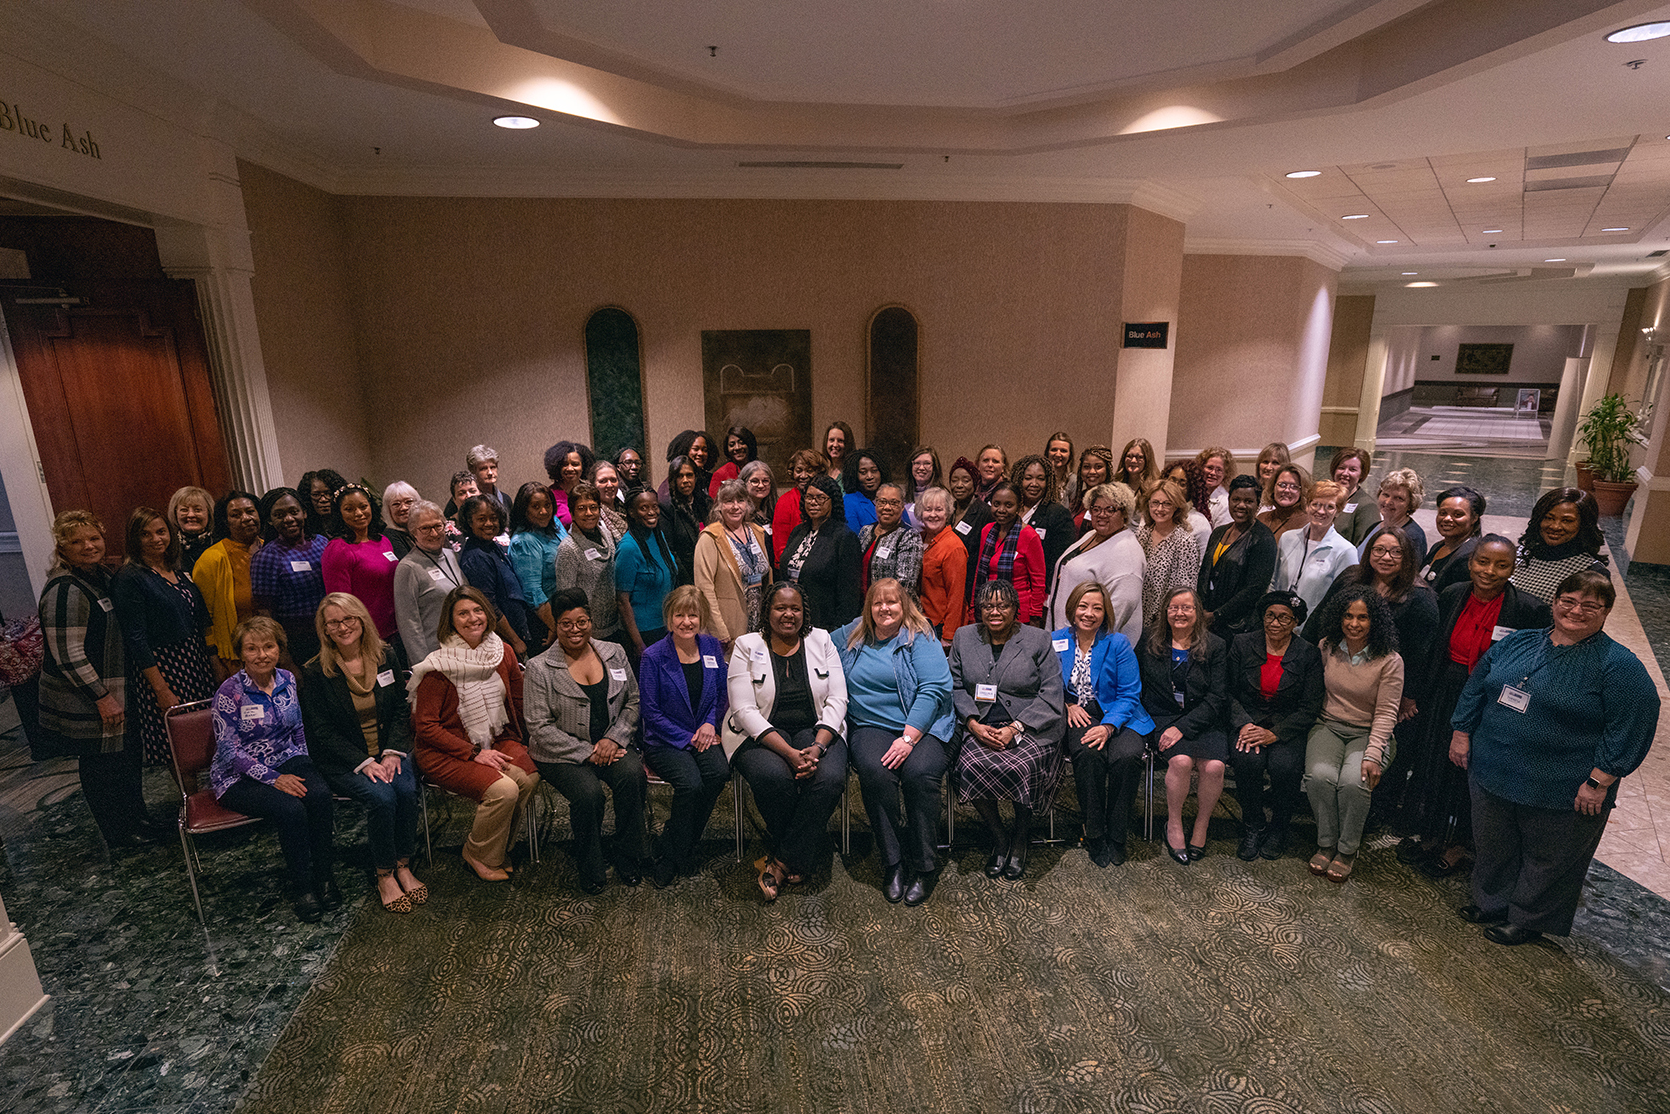 Attendees of the Adventist Women Leaders (AWL) luncheon held January 11, 2023, at the conclusion of the North American Division’s 2023 “Replenish” Adventist Ministries Convention